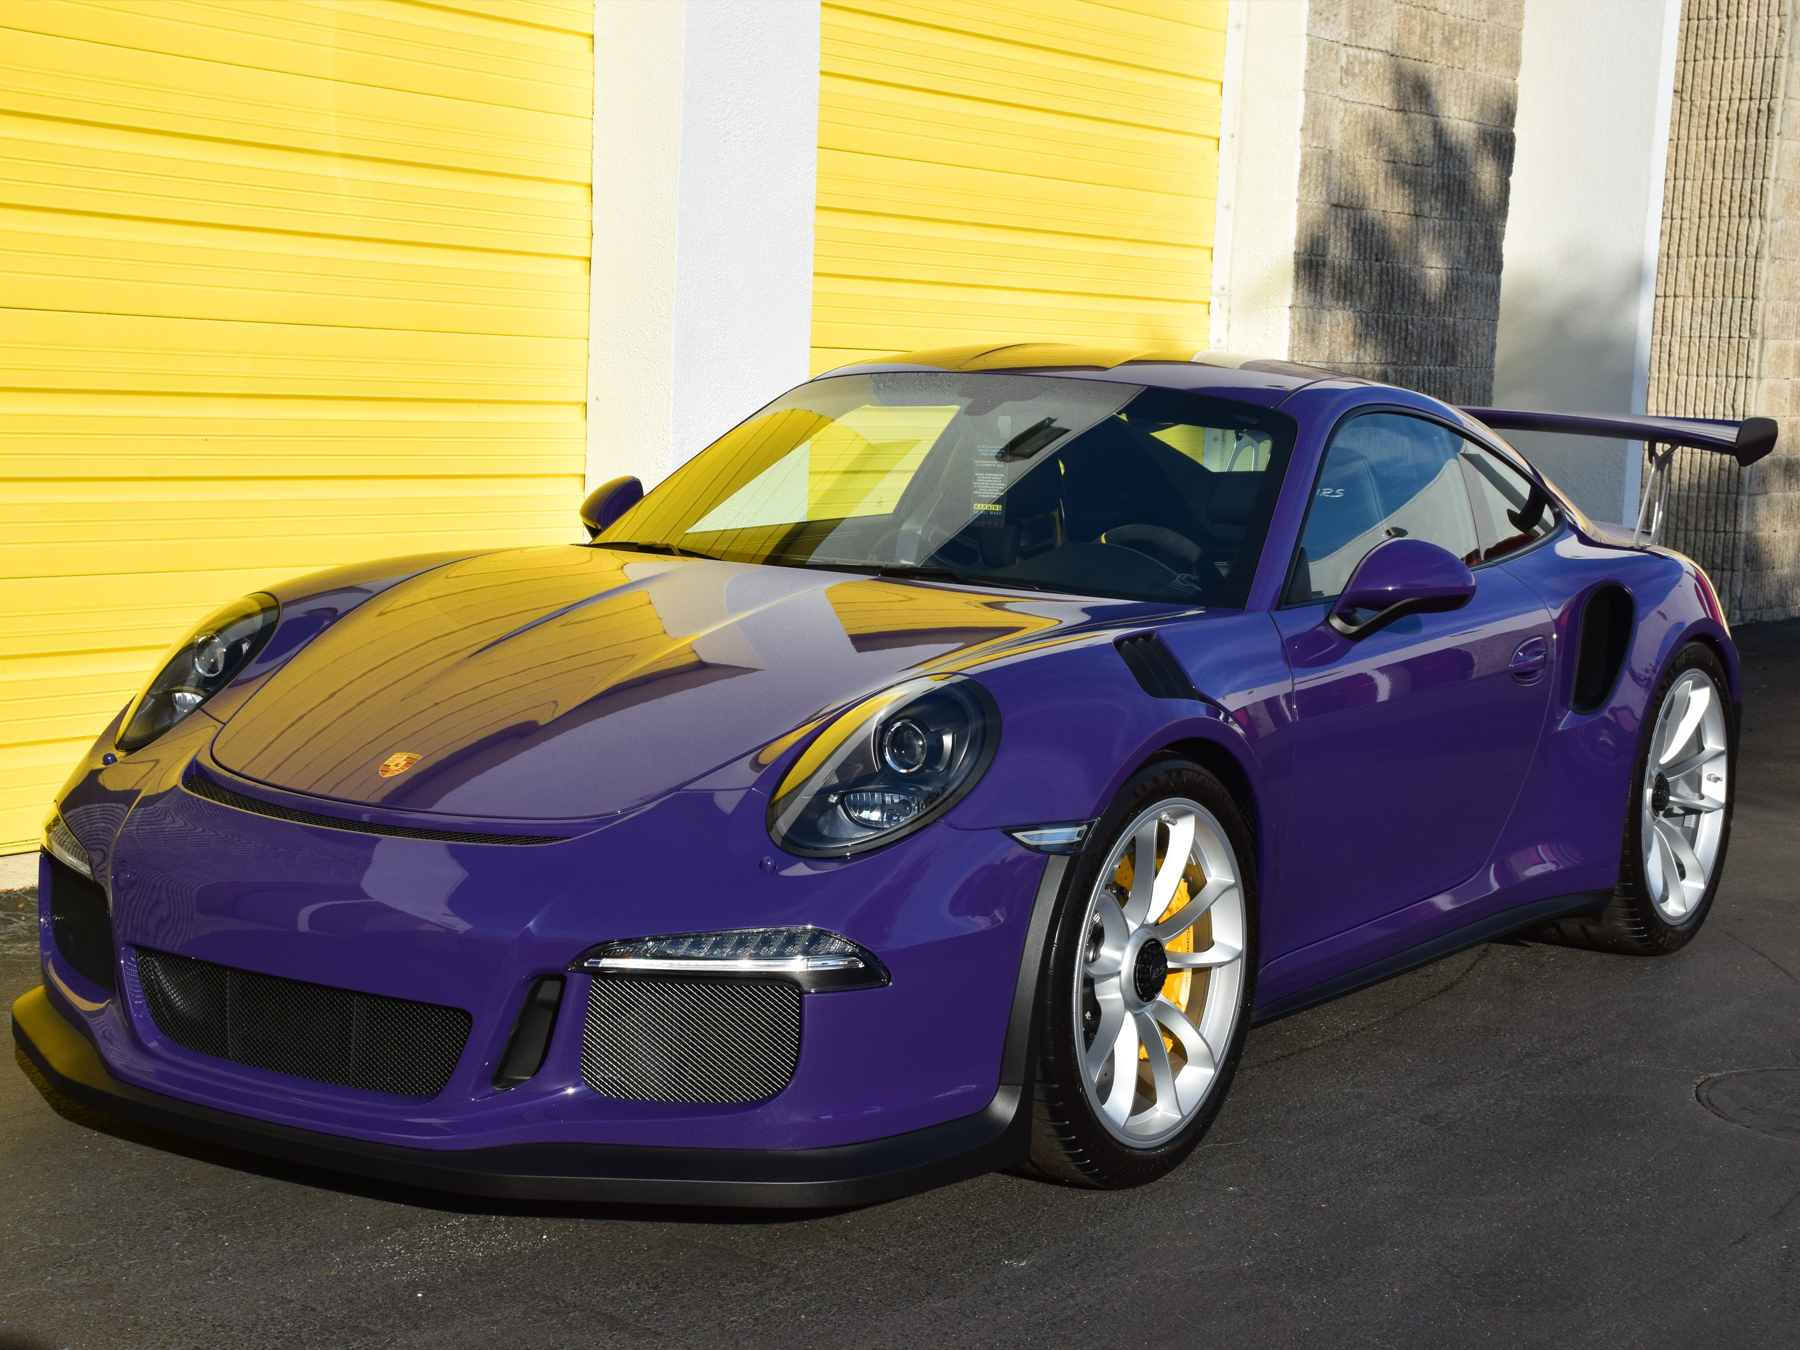 Porsche-GT3-XPEL-Ultimate-full-frontal-paint-protection-film-a